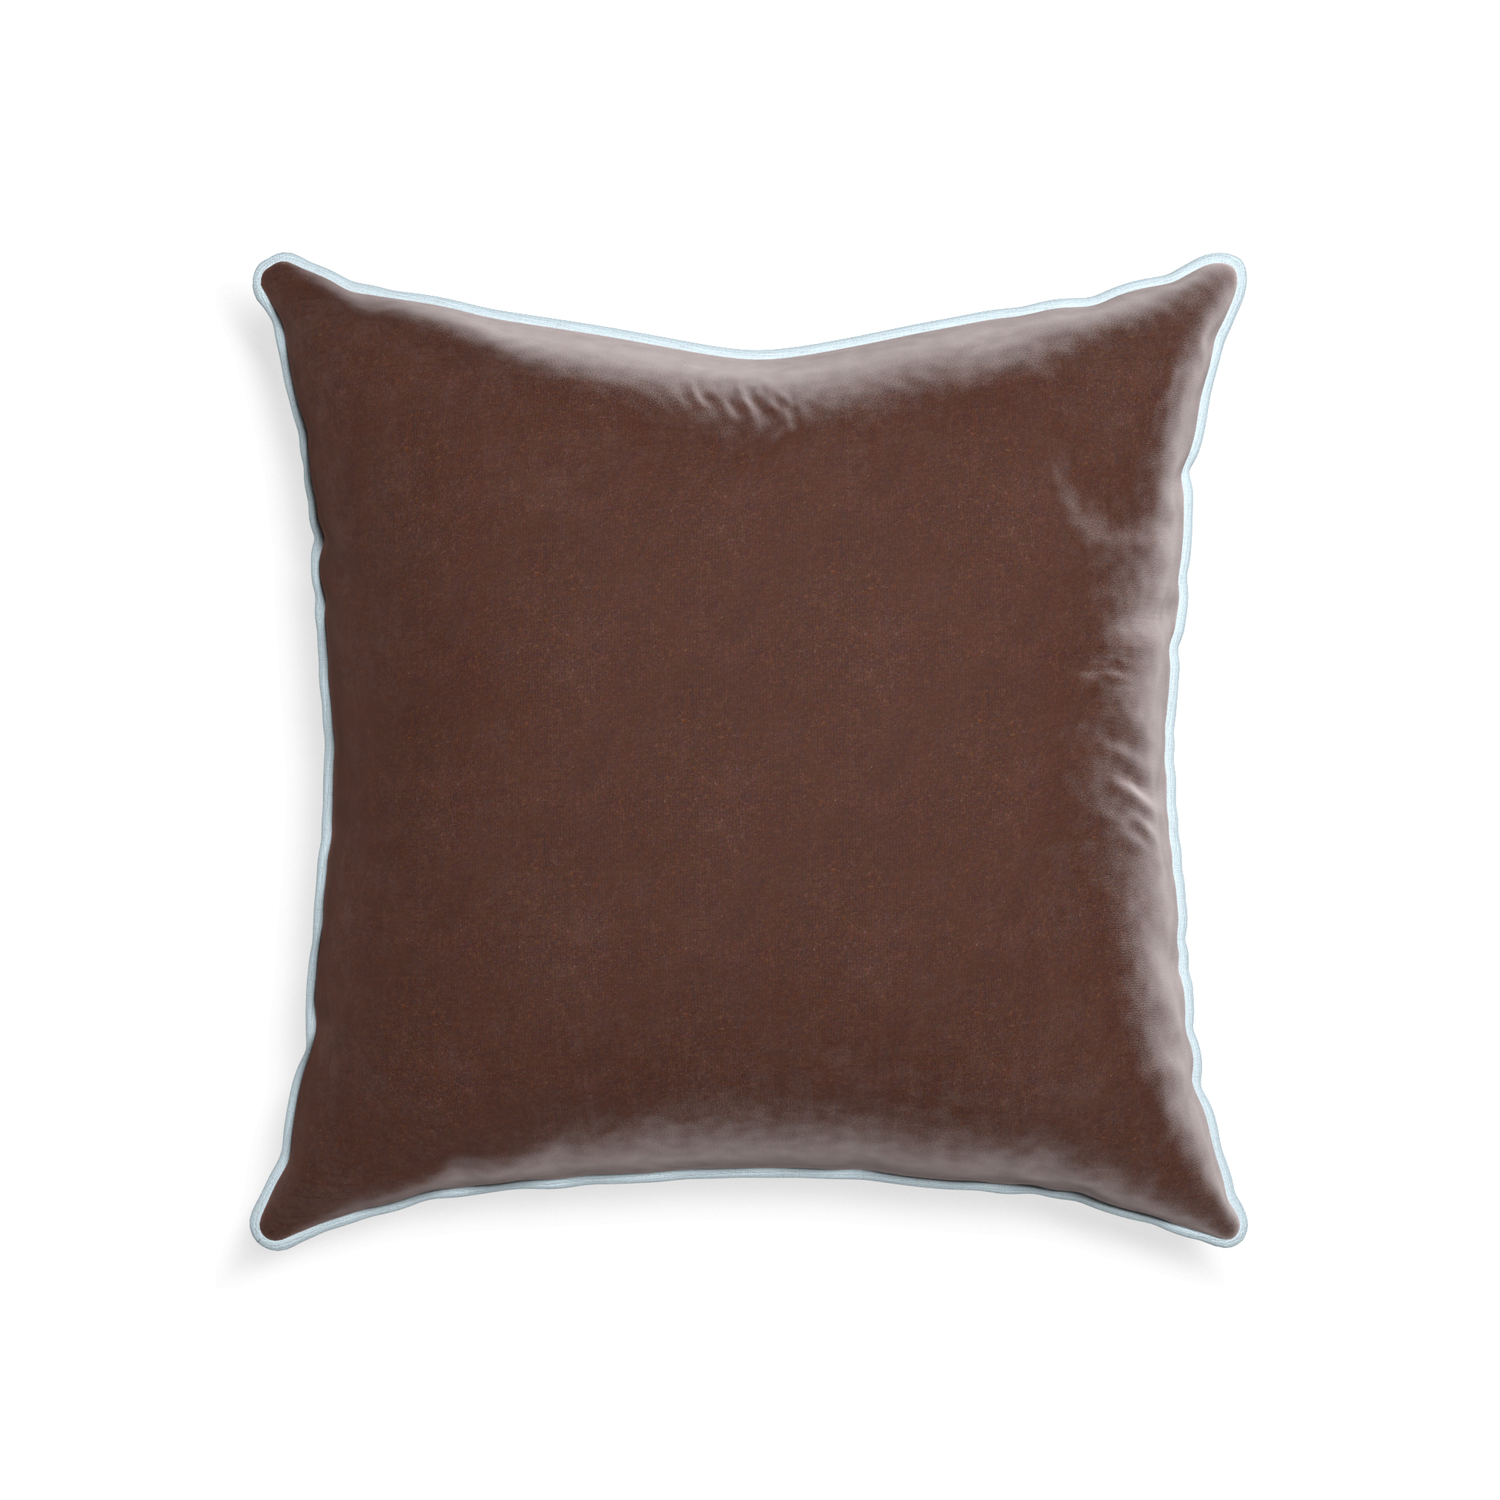 square brown velvet pillow with light blue piping